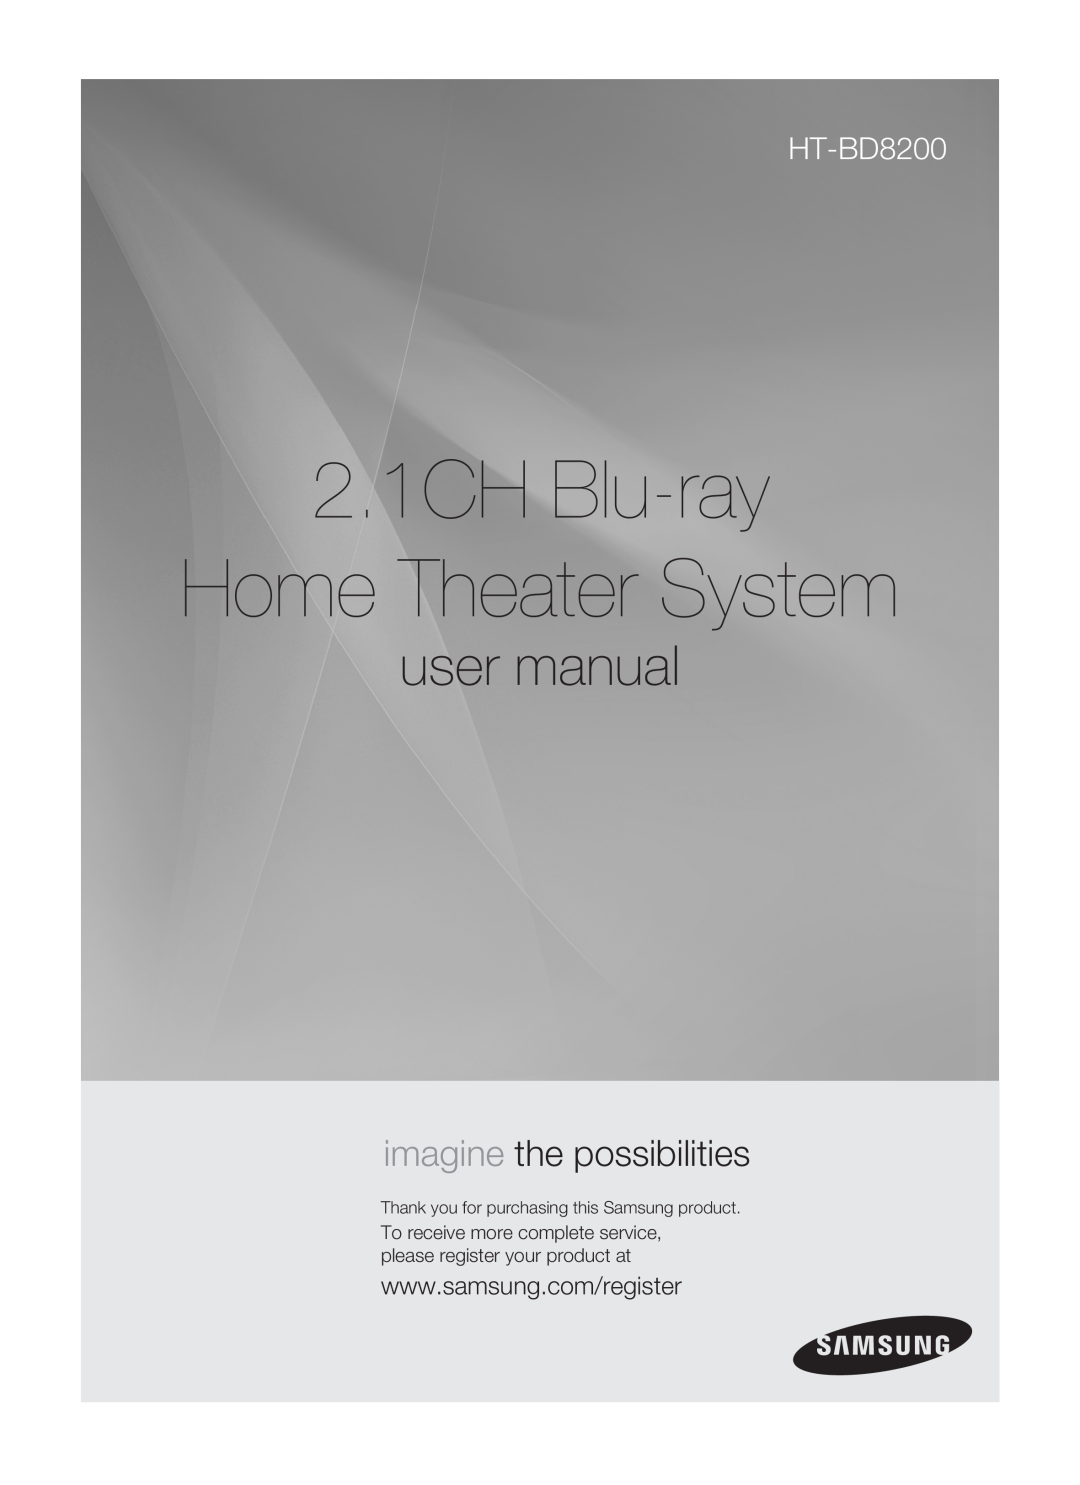 Samsung HT-BD8200 user manual 2.1CH Blu-ray Home Theater System, imagine the possibilities 